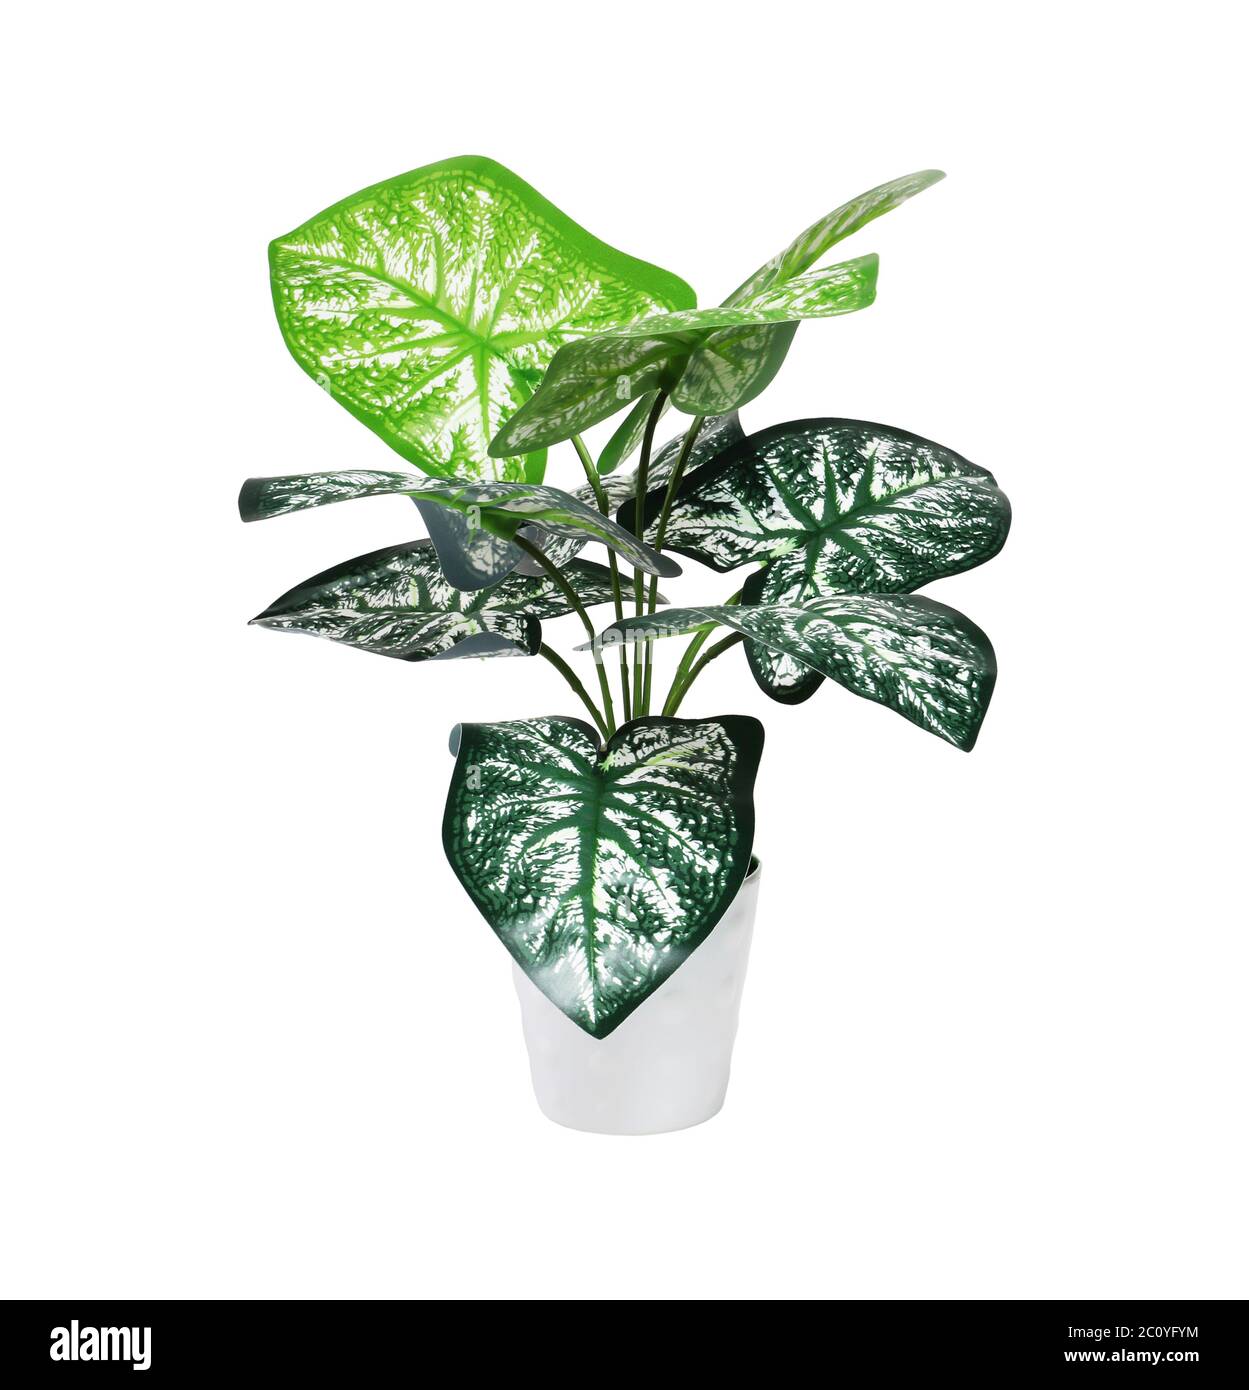 Plastic Arrow Head Potted Plant on White Background Stock Photo